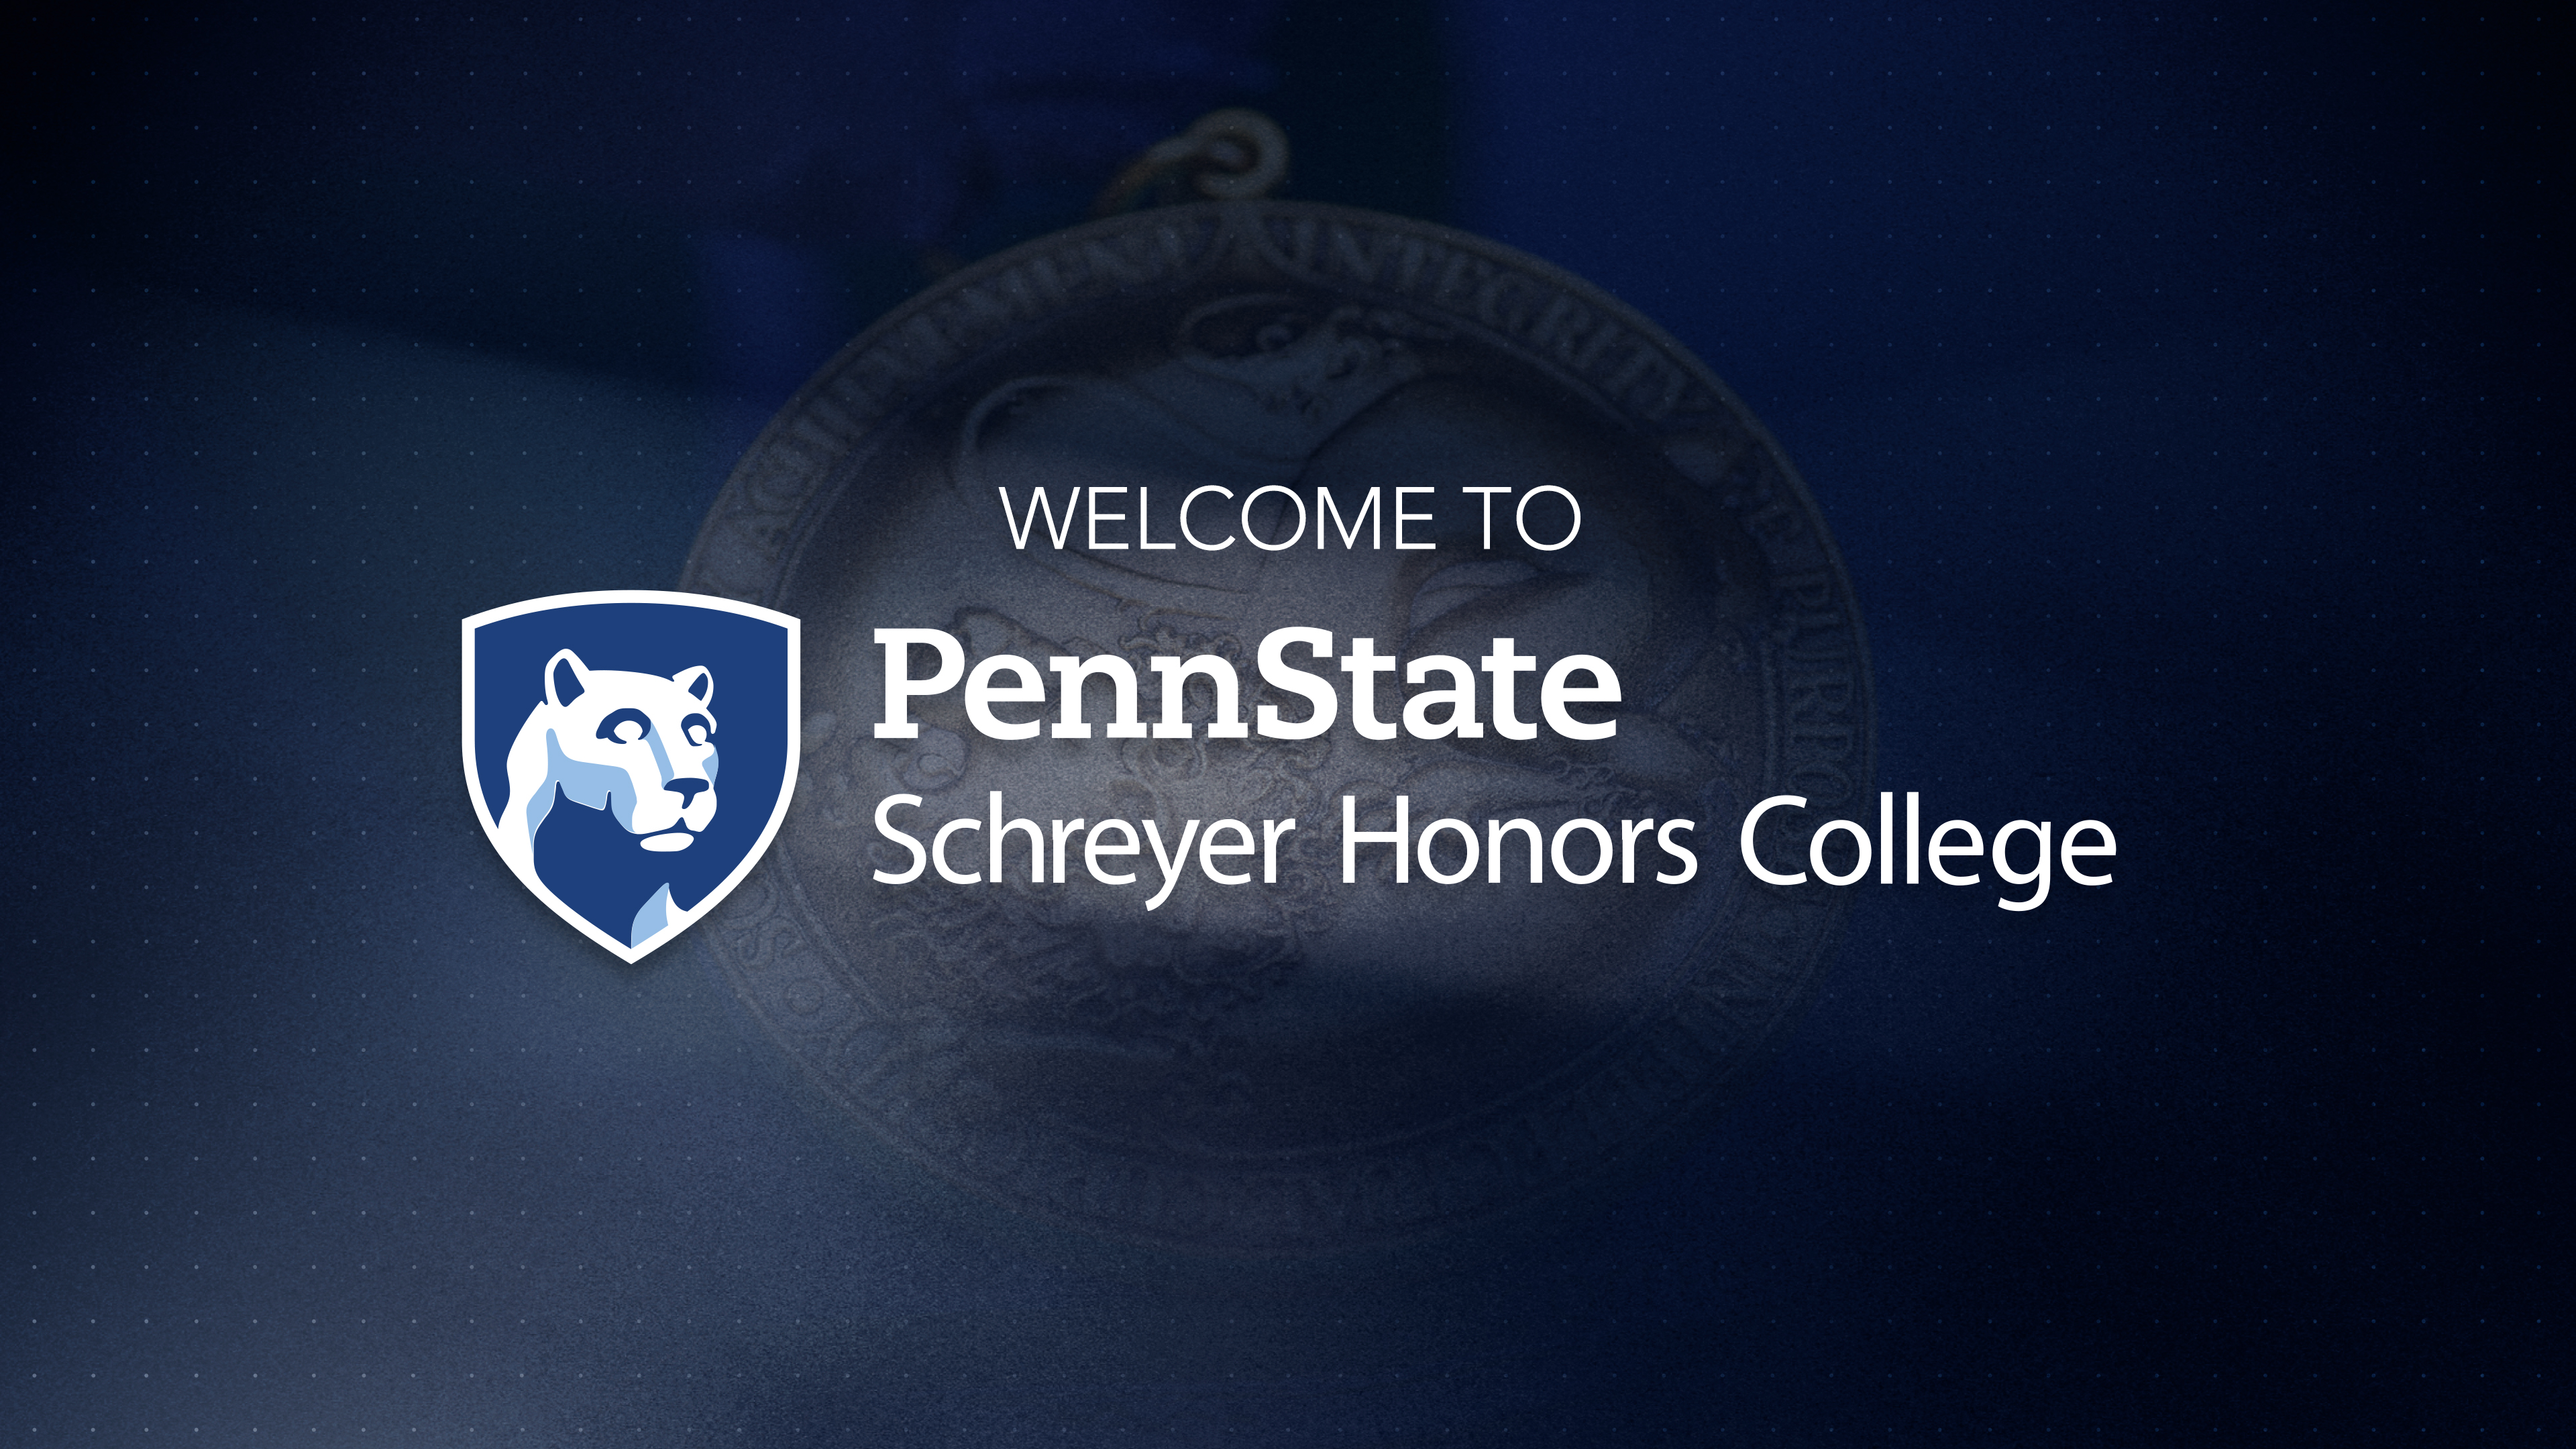 Welcome to the Schreyer Honors College at Penn State